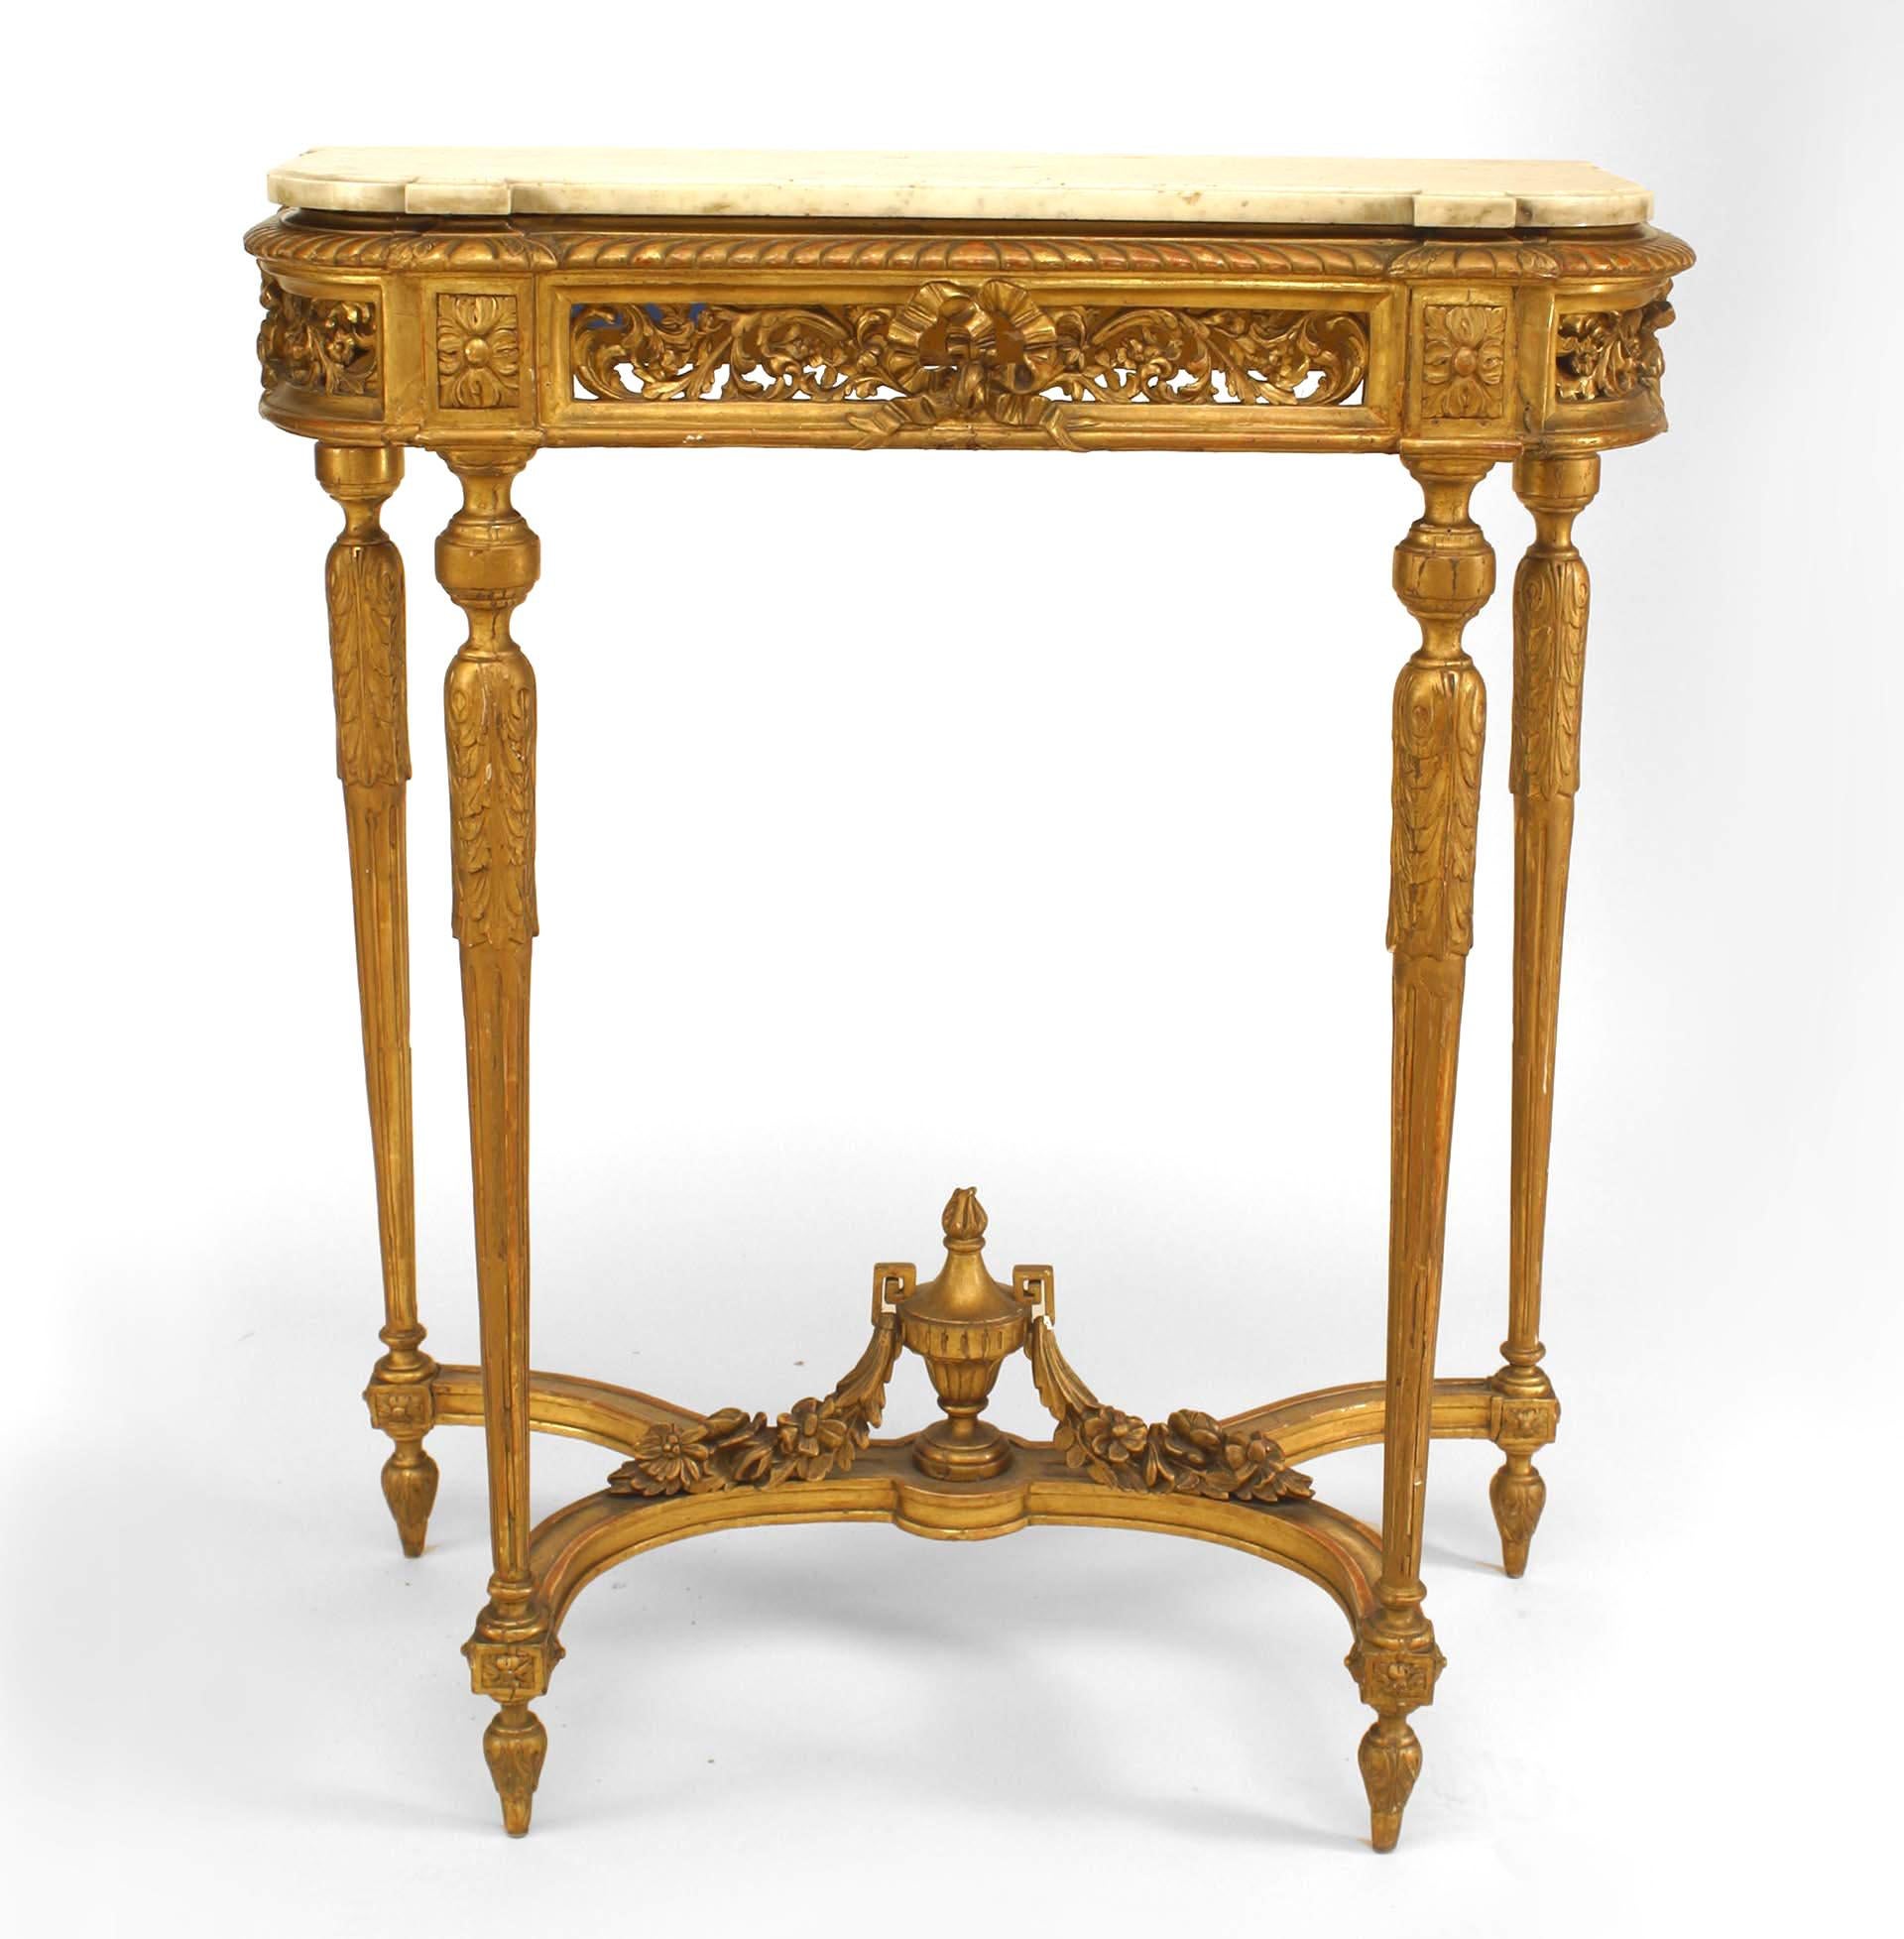 French Louis XVI style (19th century) gilt console table with filigree apron, urn stretcher, and white marble top.
 